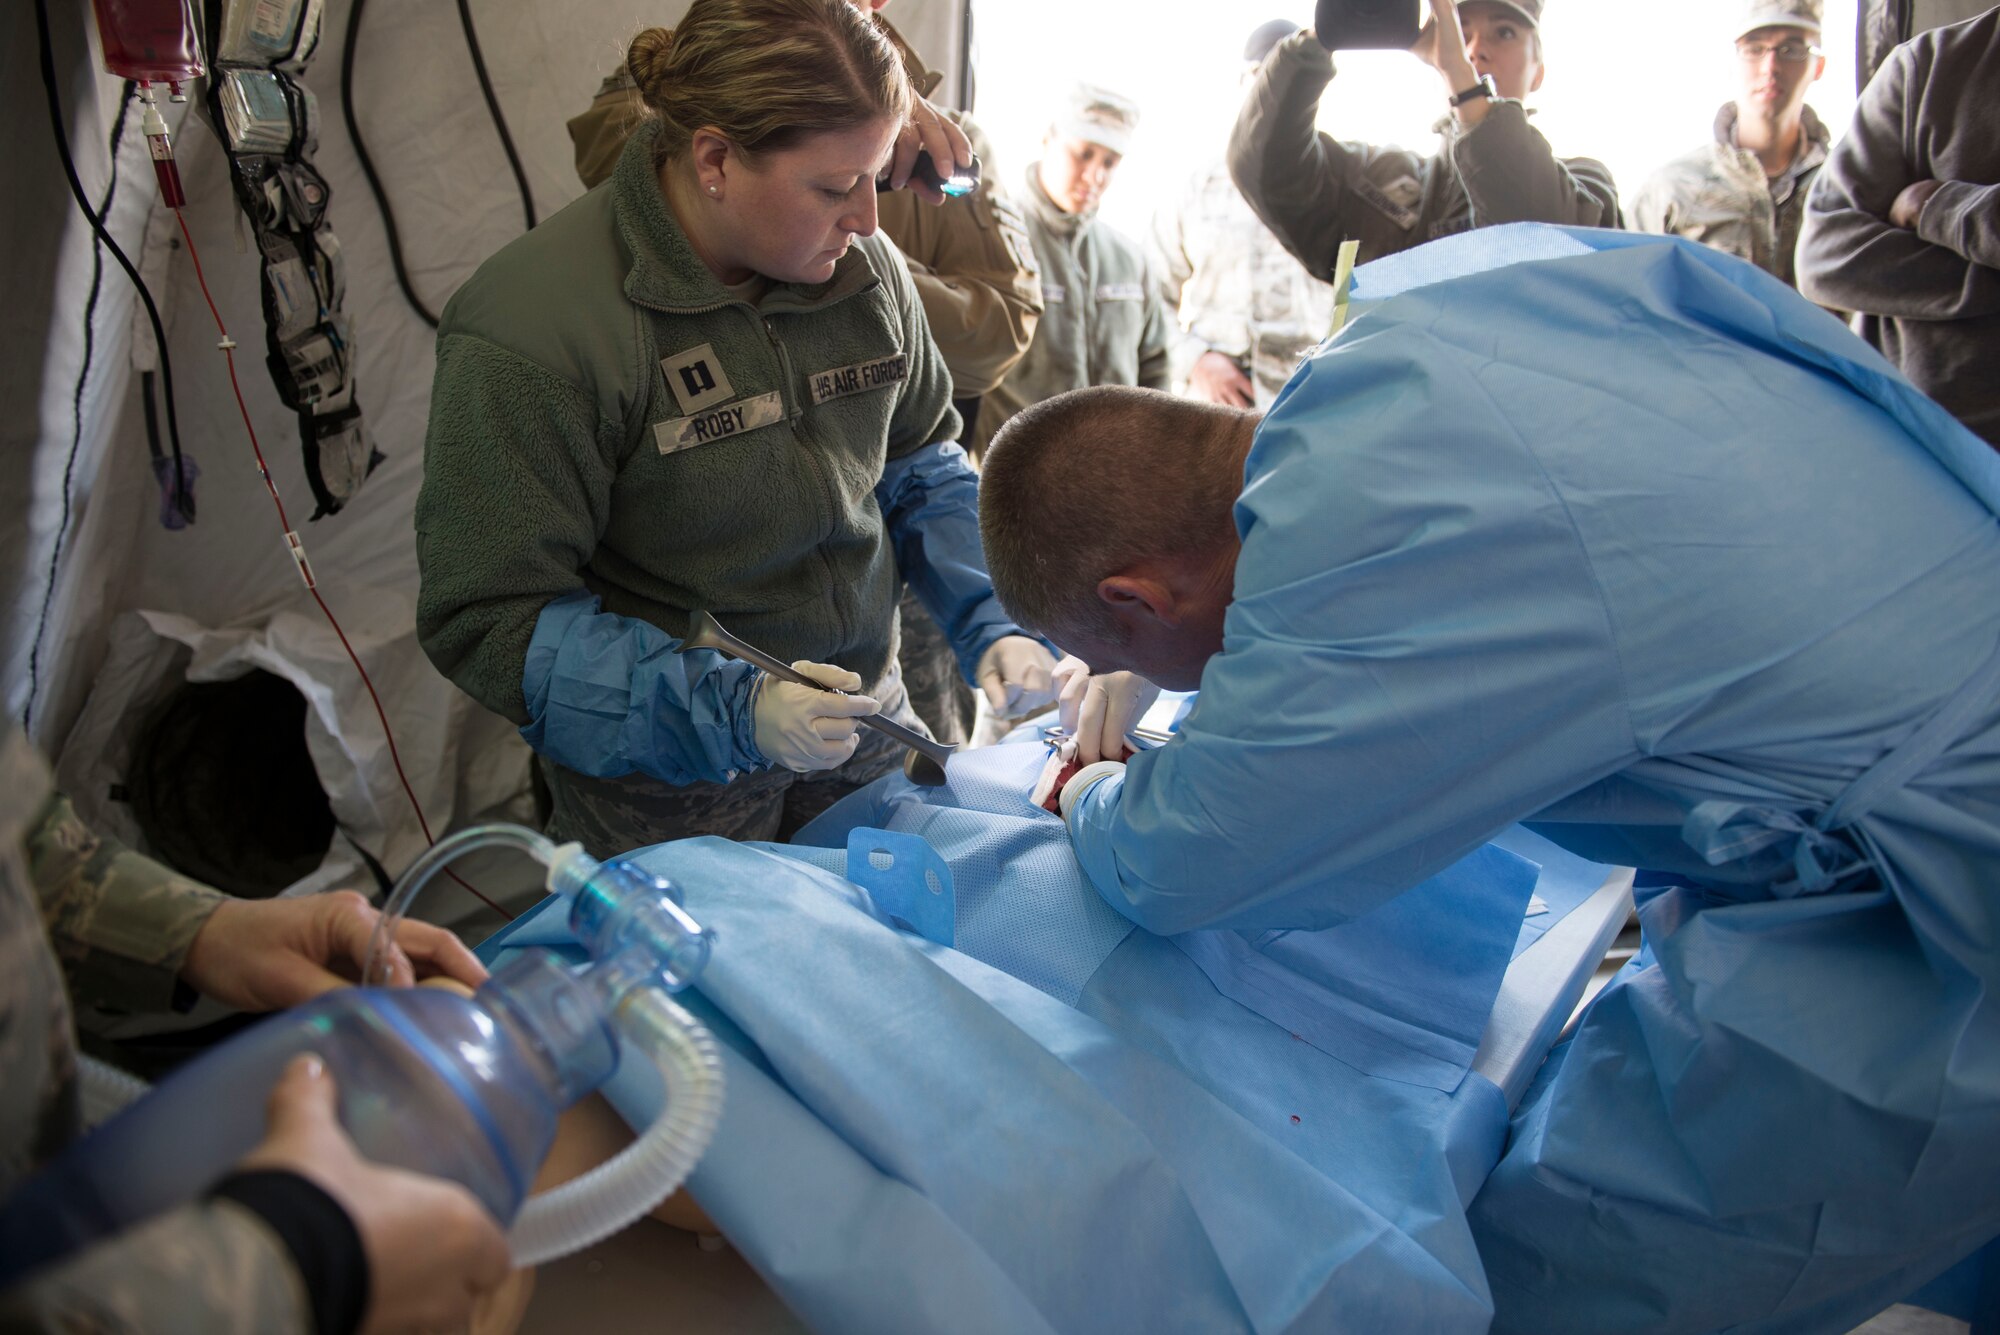 A surgical team rushes into action after realizing a simulated fatal injury during Gunfighter Flag 16-1 at Mountain Home Air Force Base, Idaho, Nov. 5, 2015. Some simulated injuries were meant to be distractions from more serious ones to test the team’s ability to triage different injuries. (U.S. Air Force photo by Airman 1st Class Jessica H. Evans/RELEASED)